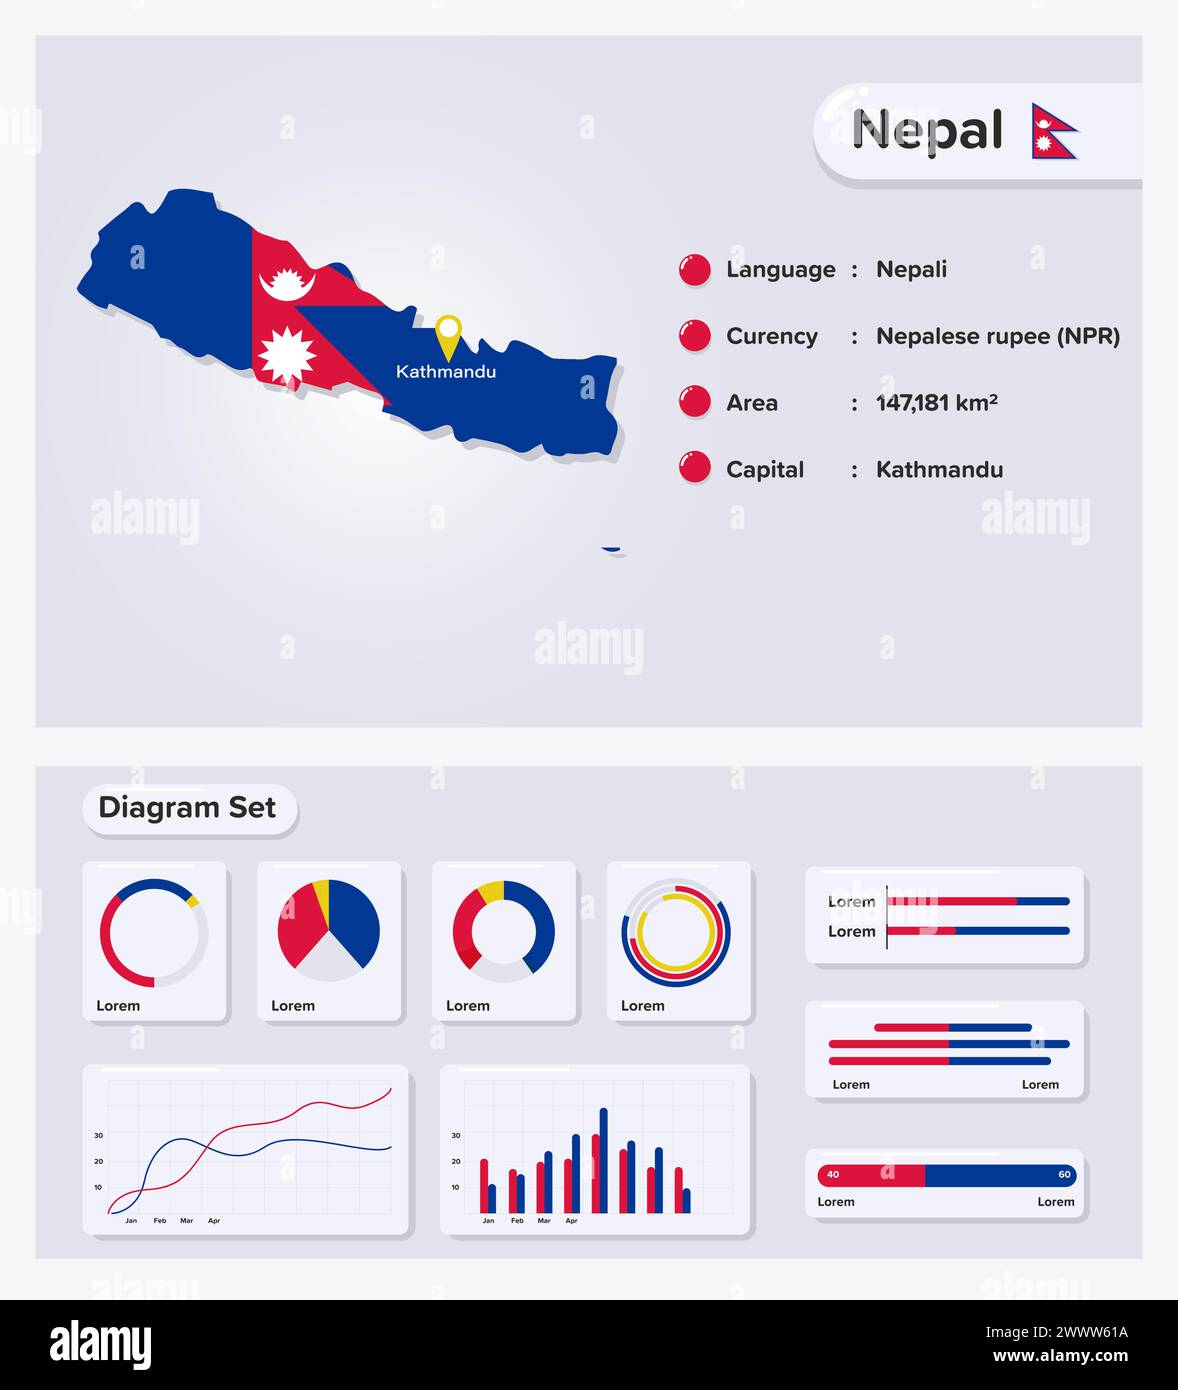 Nepal Infographic Vector Illustration, Nepal Statistical Data Element, Information Board with Flag Map, Nepal Map Flag with Diagram Set Flat Design Illustrazione Vettoriale